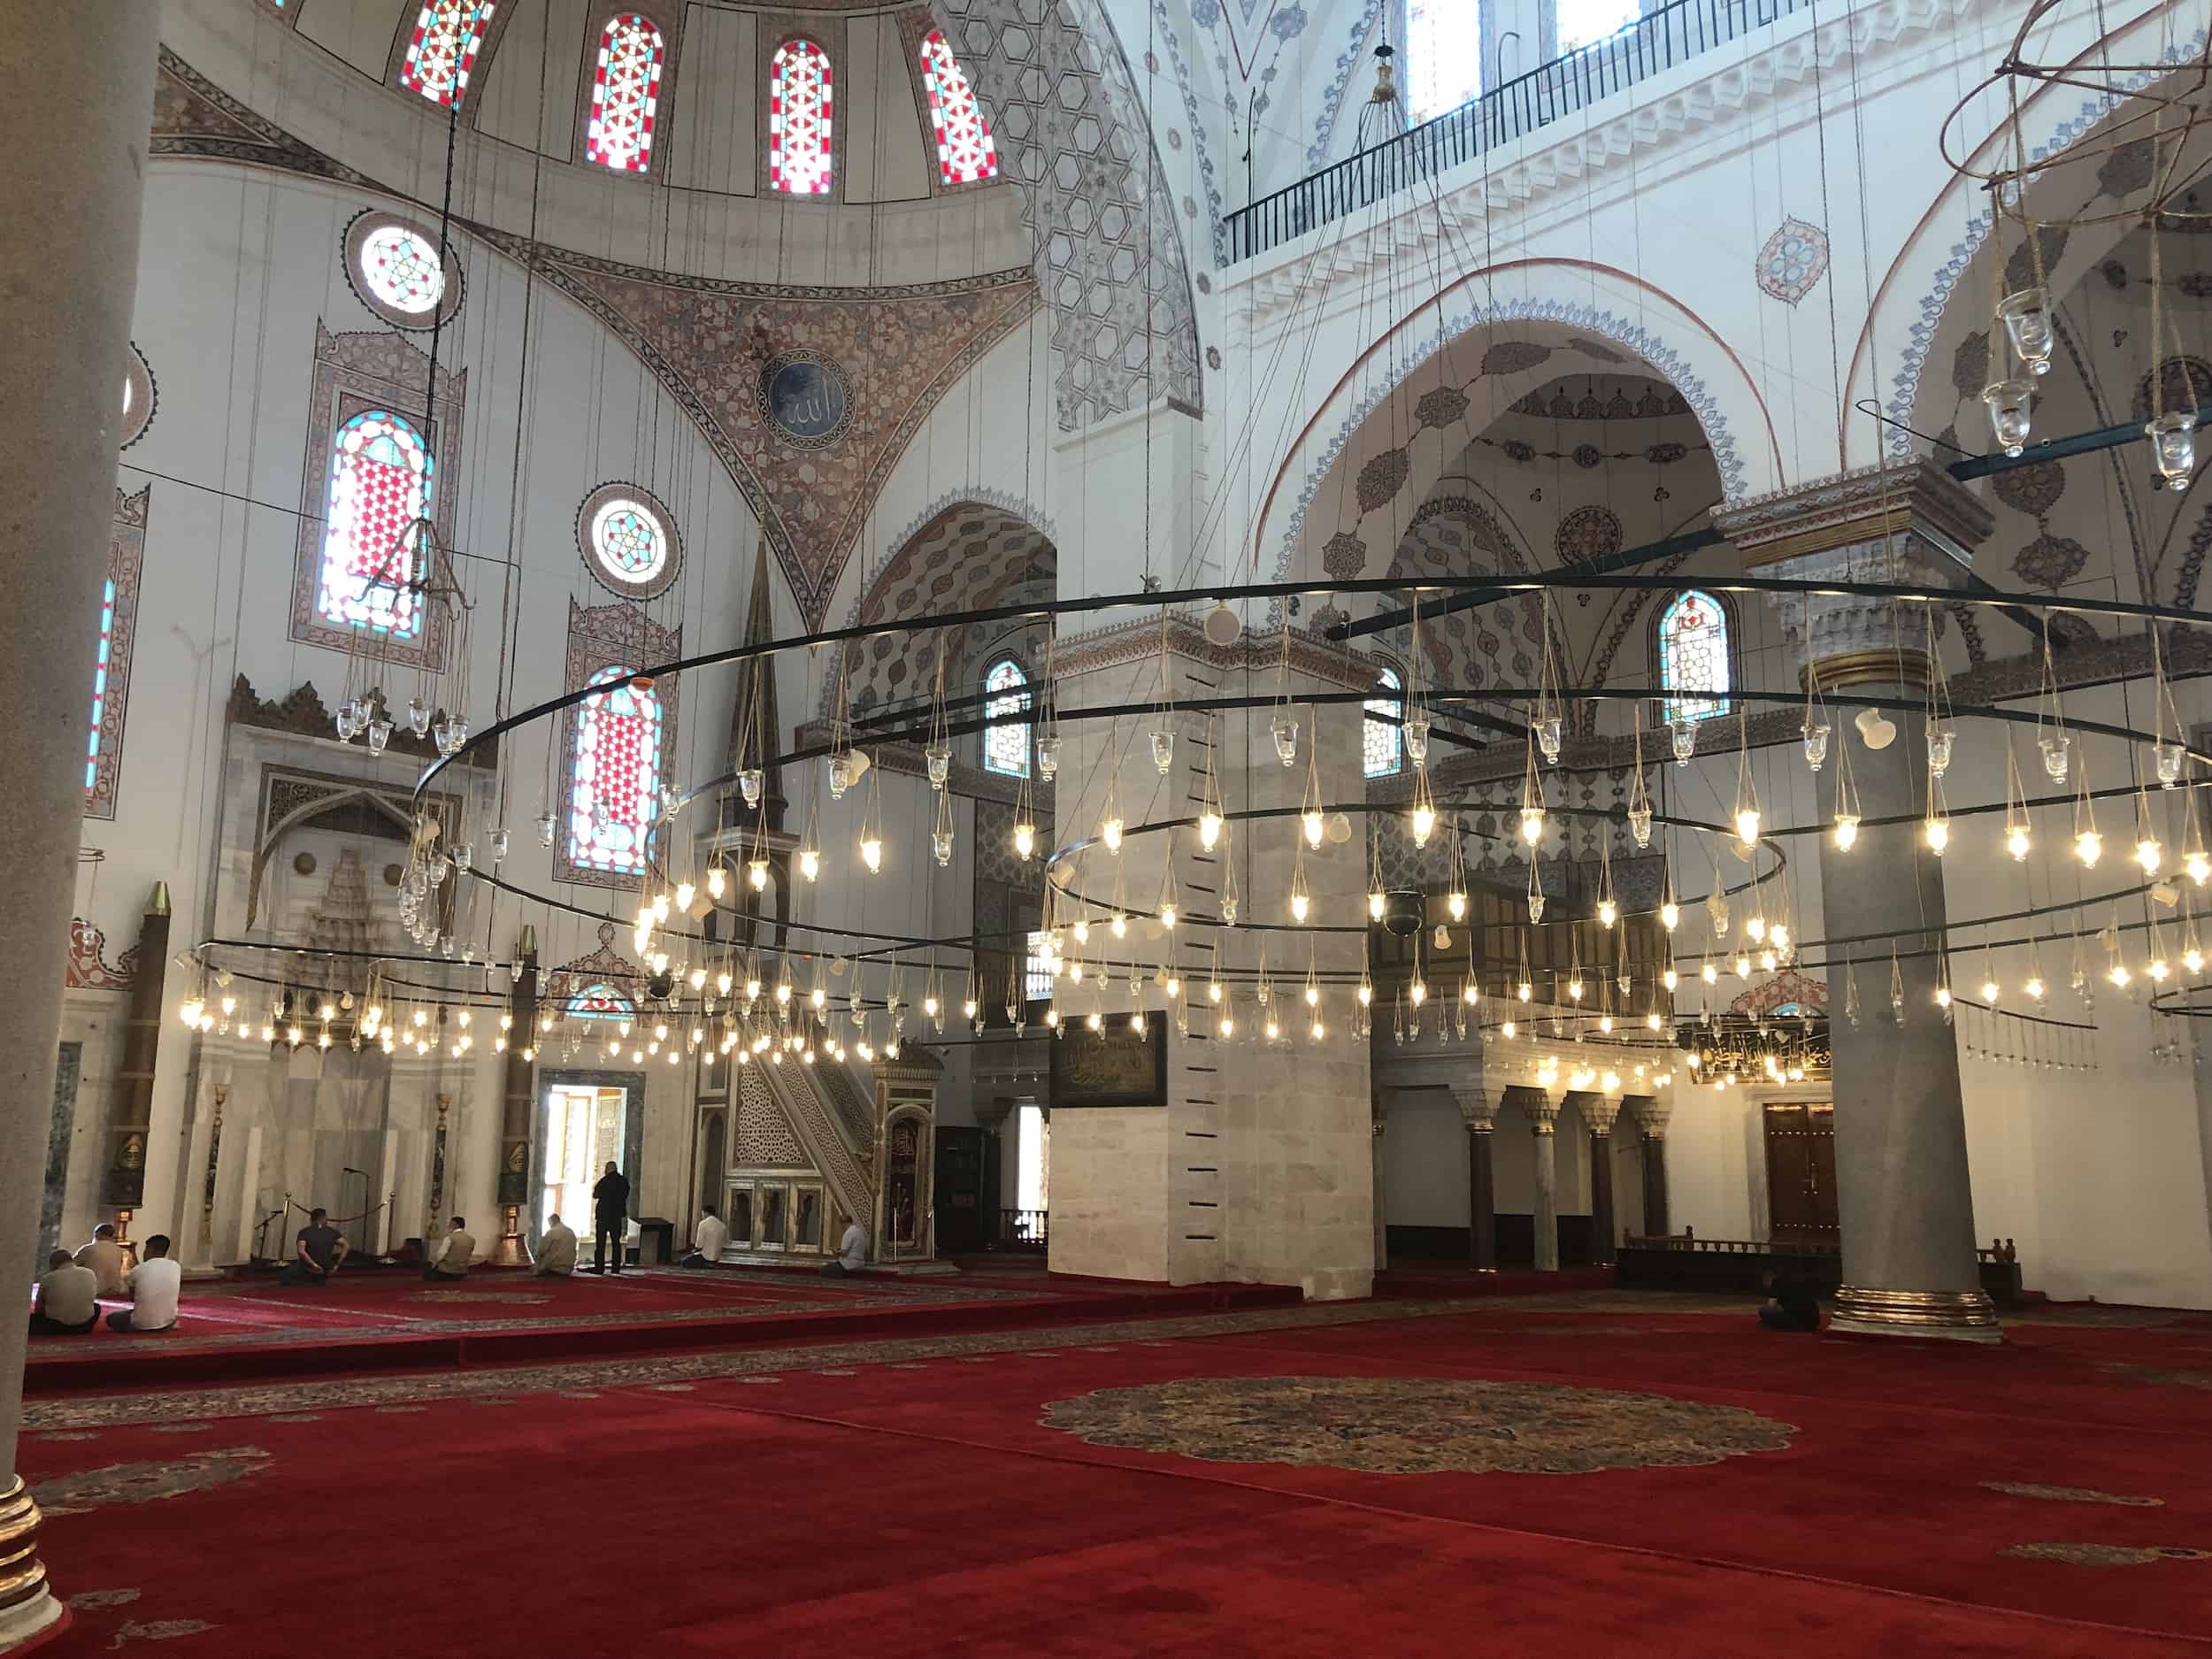 Prayer hall of the Bayezid II Mosque in Istanbul, Turkey